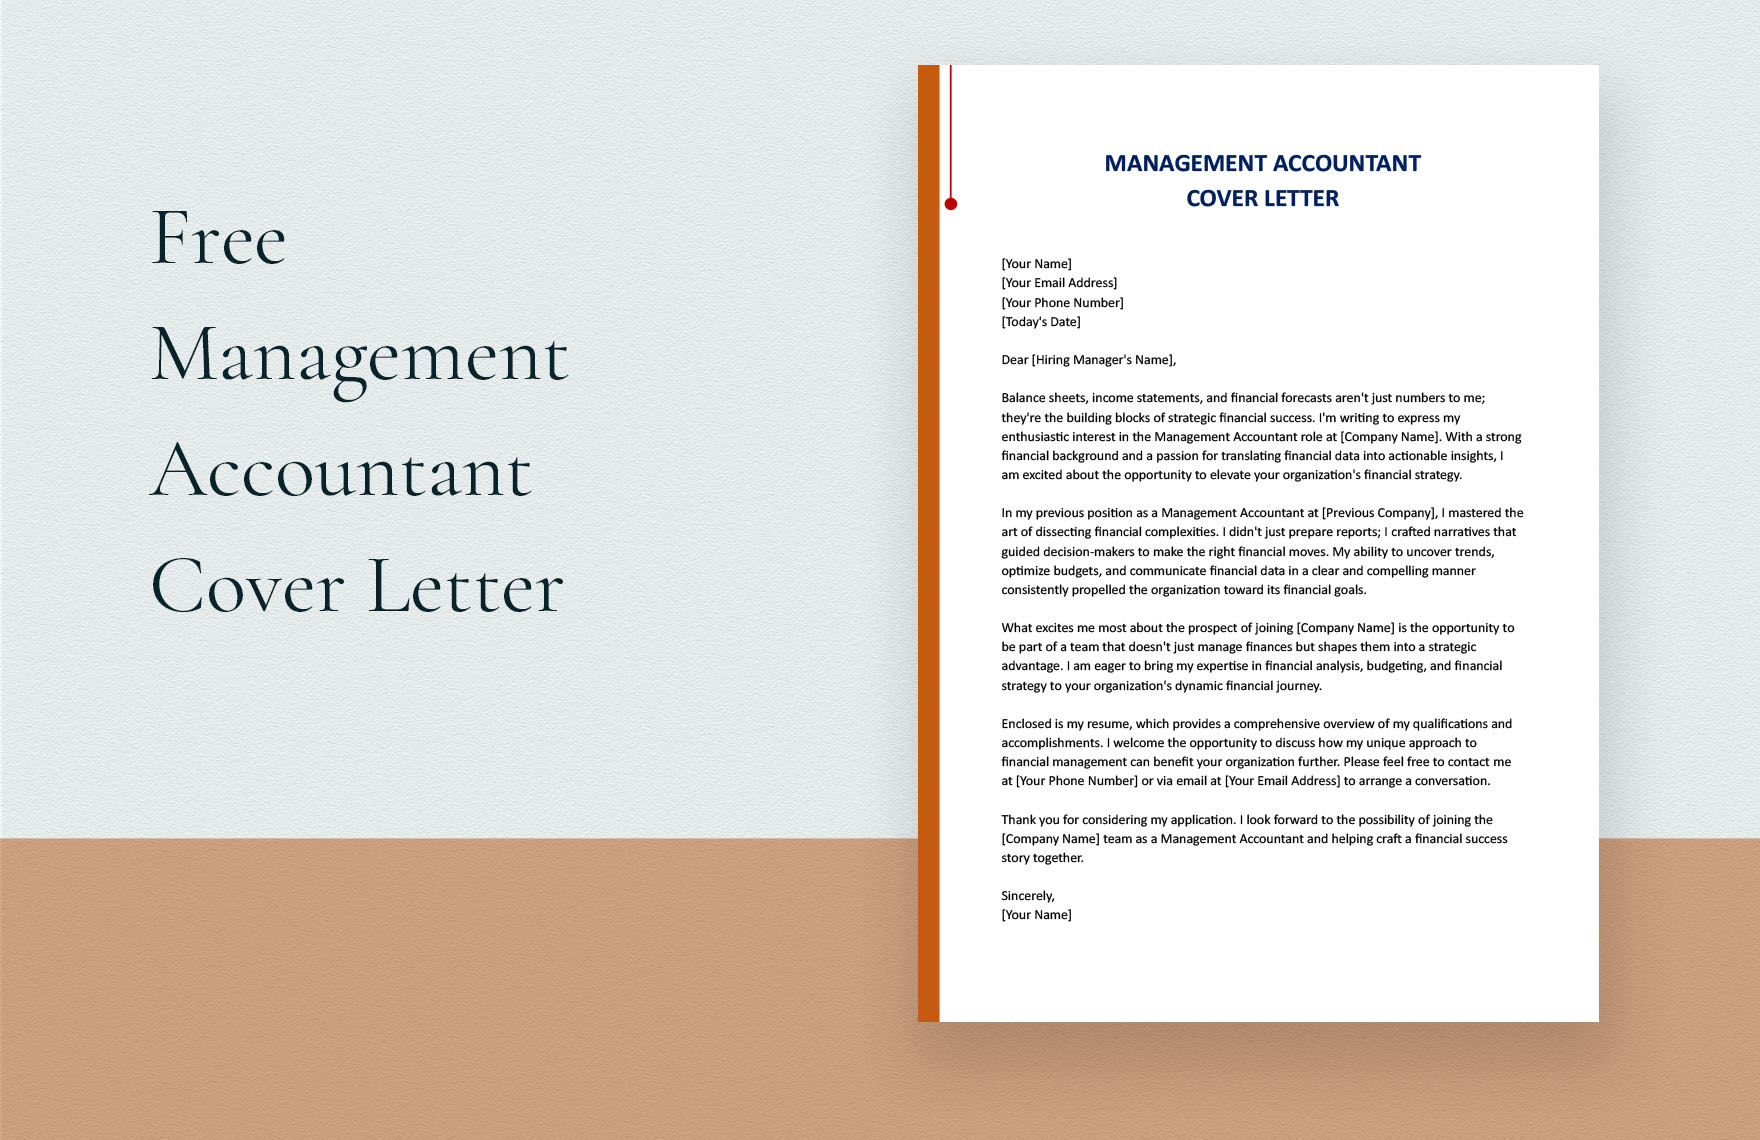 Management Accountant Cover Letter